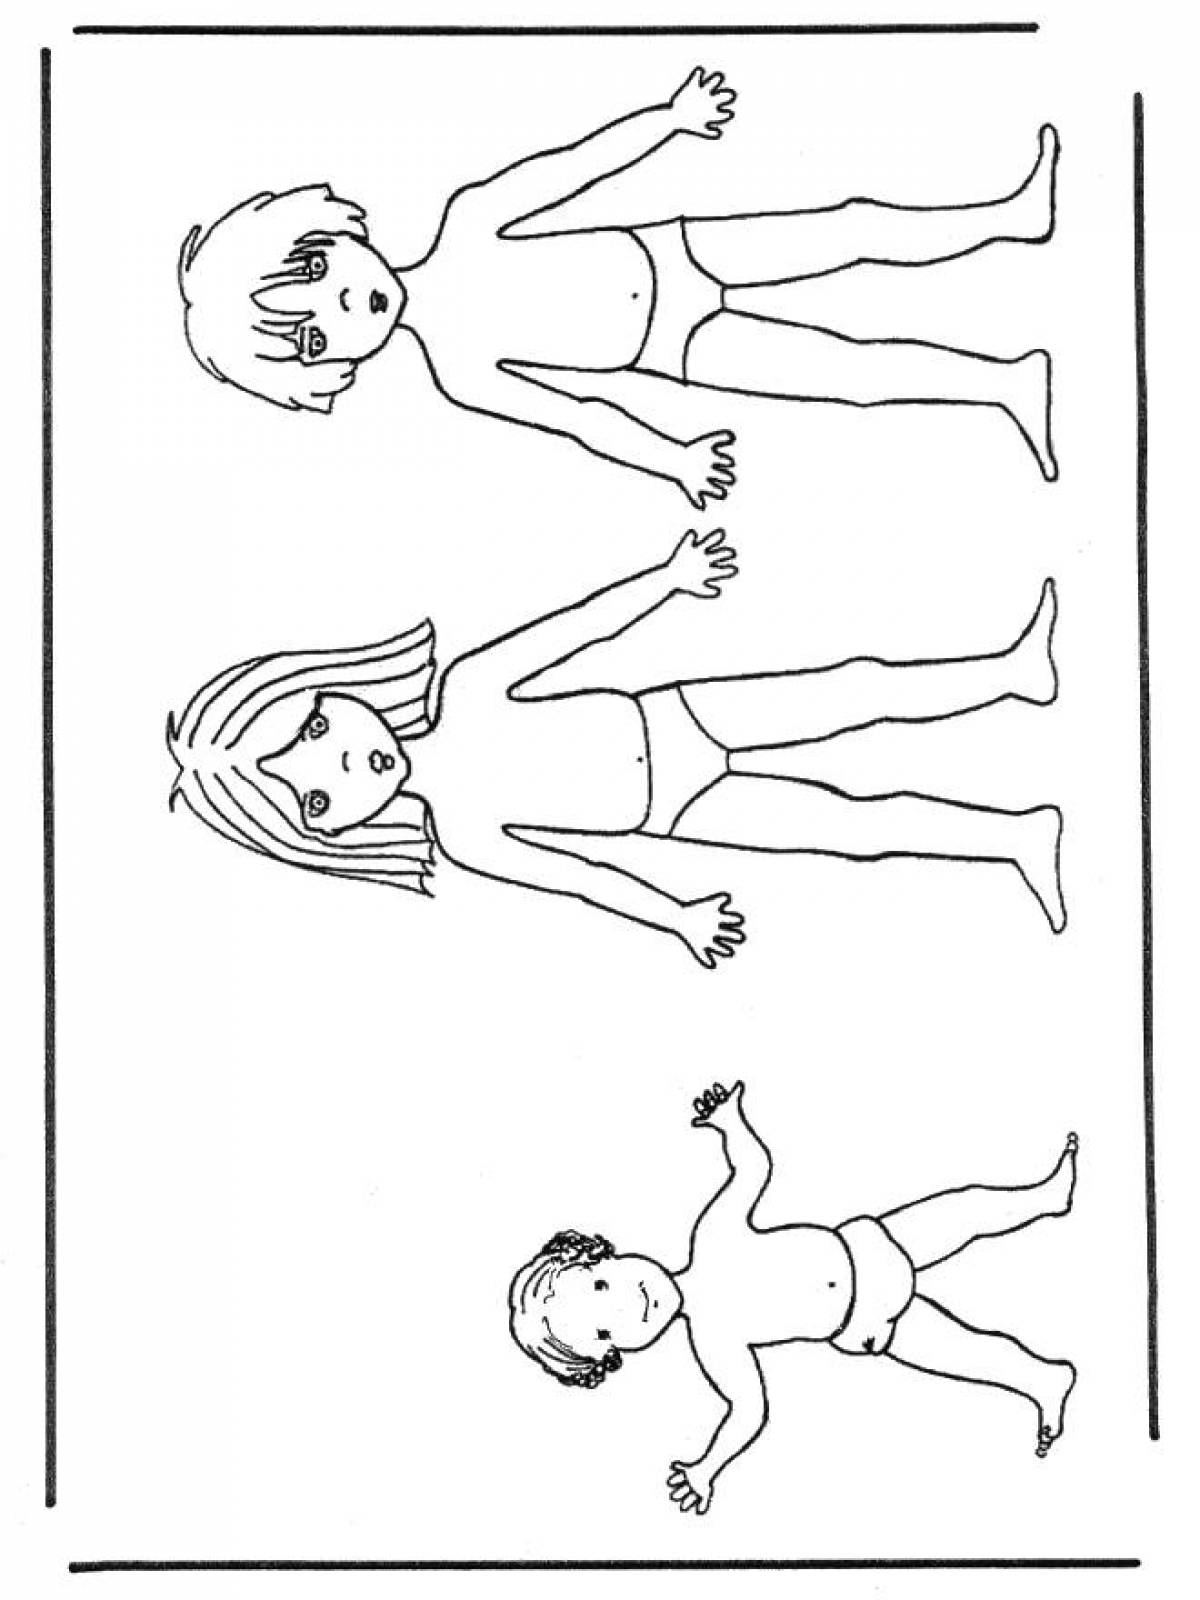 Human body for kids #6